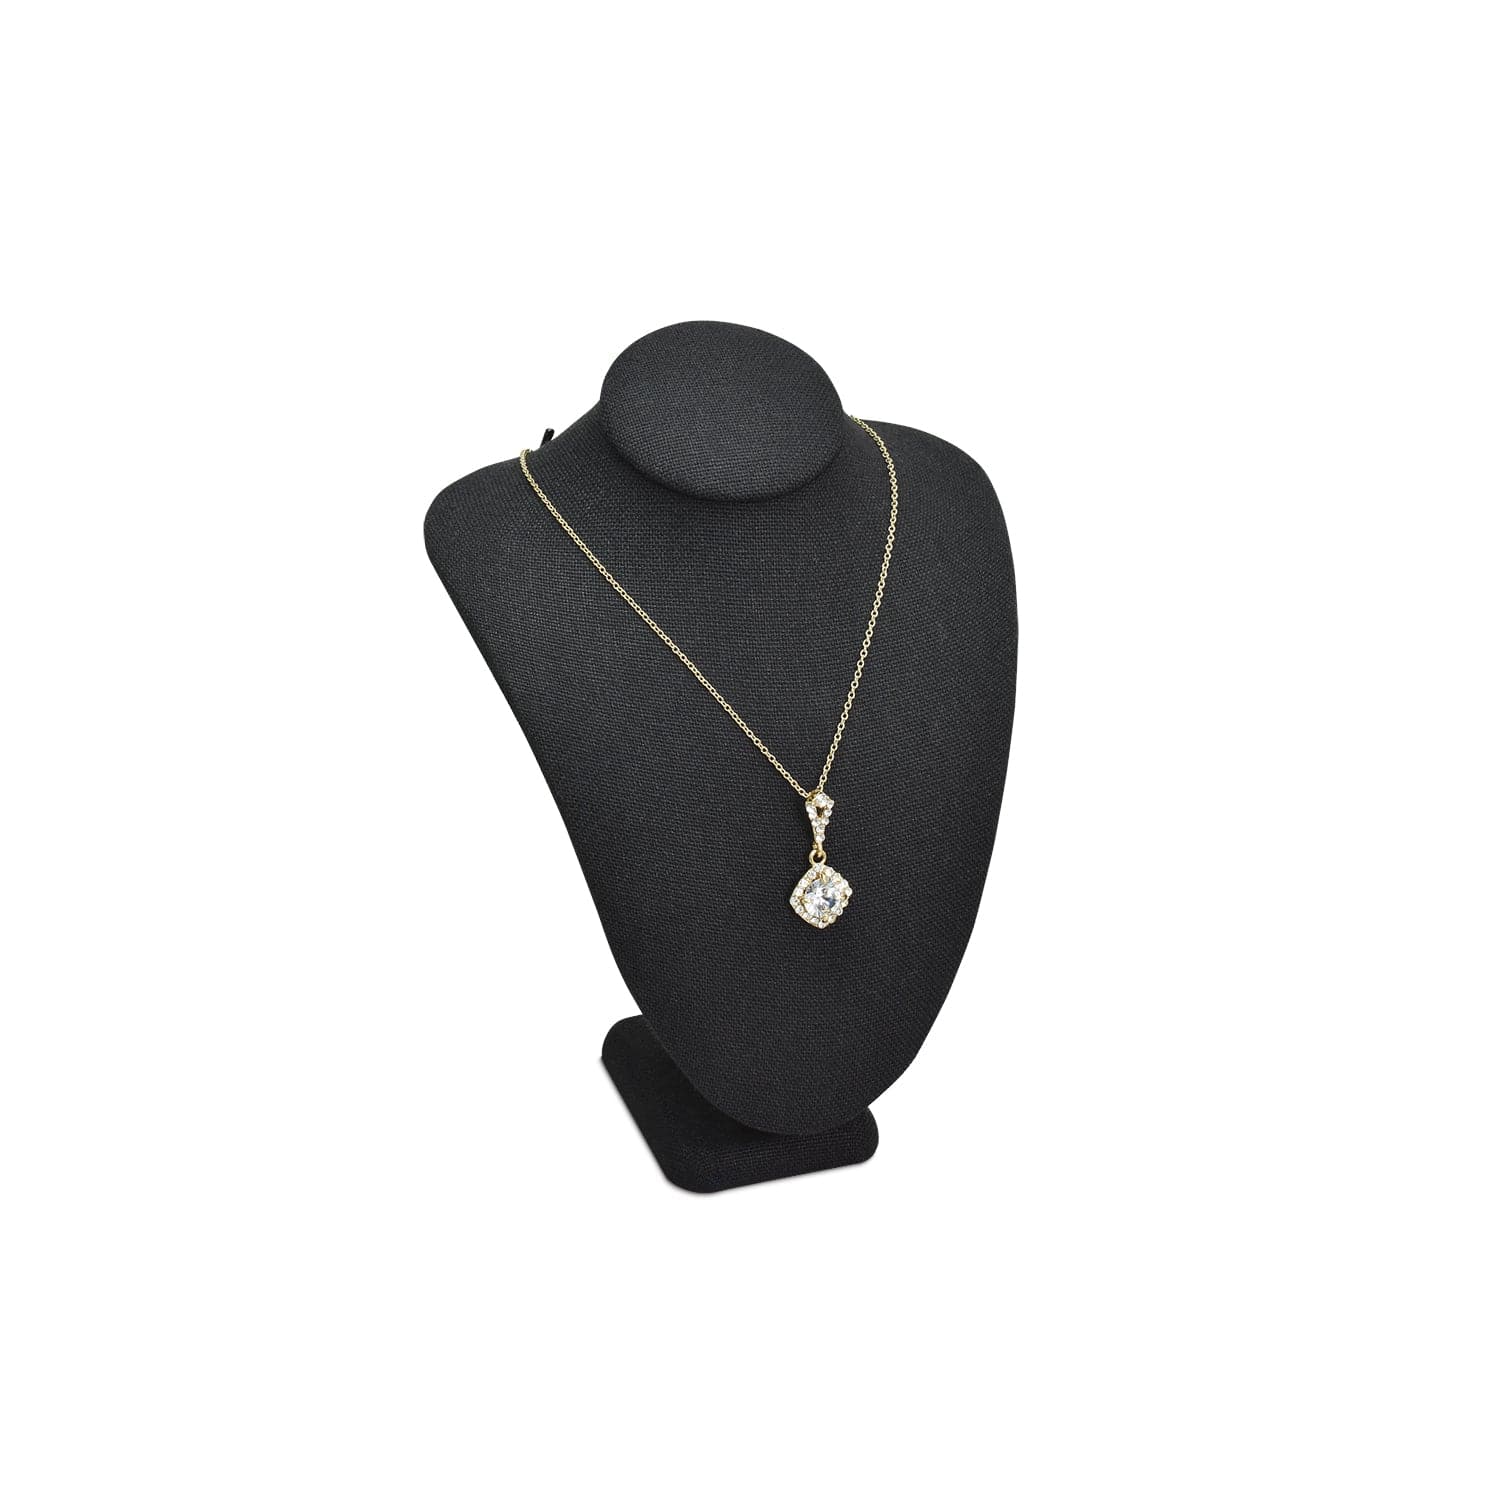 Necklace display bust covered in black man-made suedette - 55cm | Laval  Europe